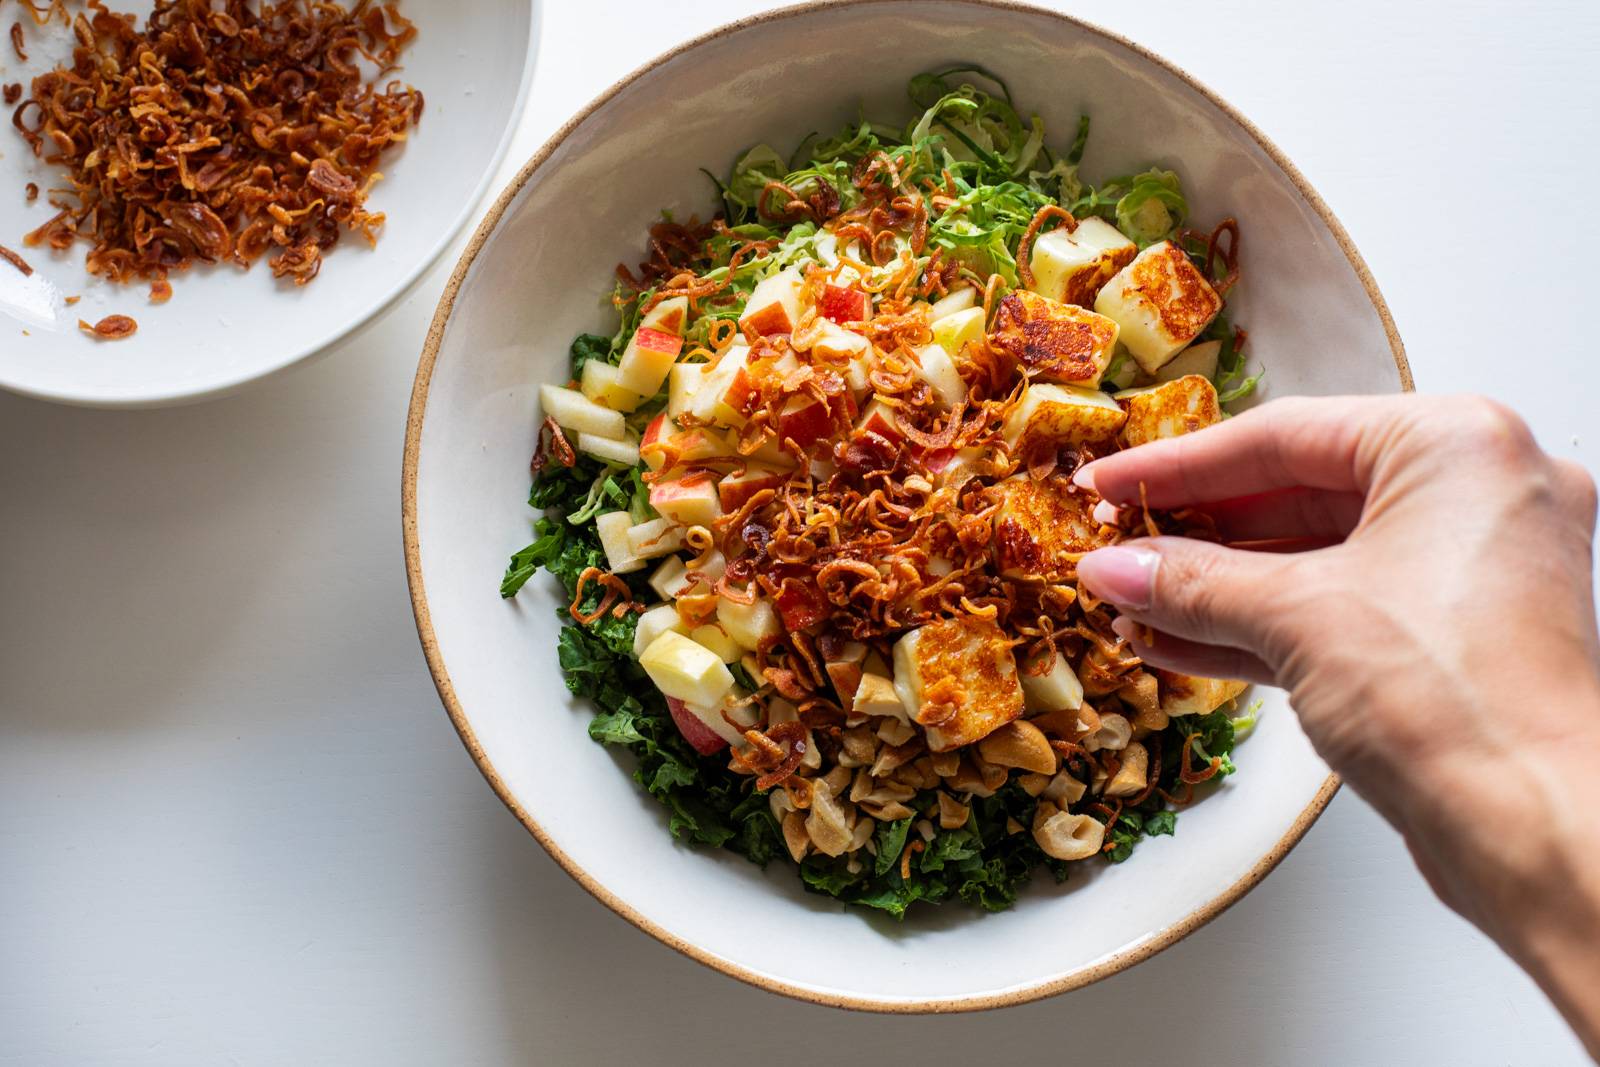 Topping salad with crispy shallots.